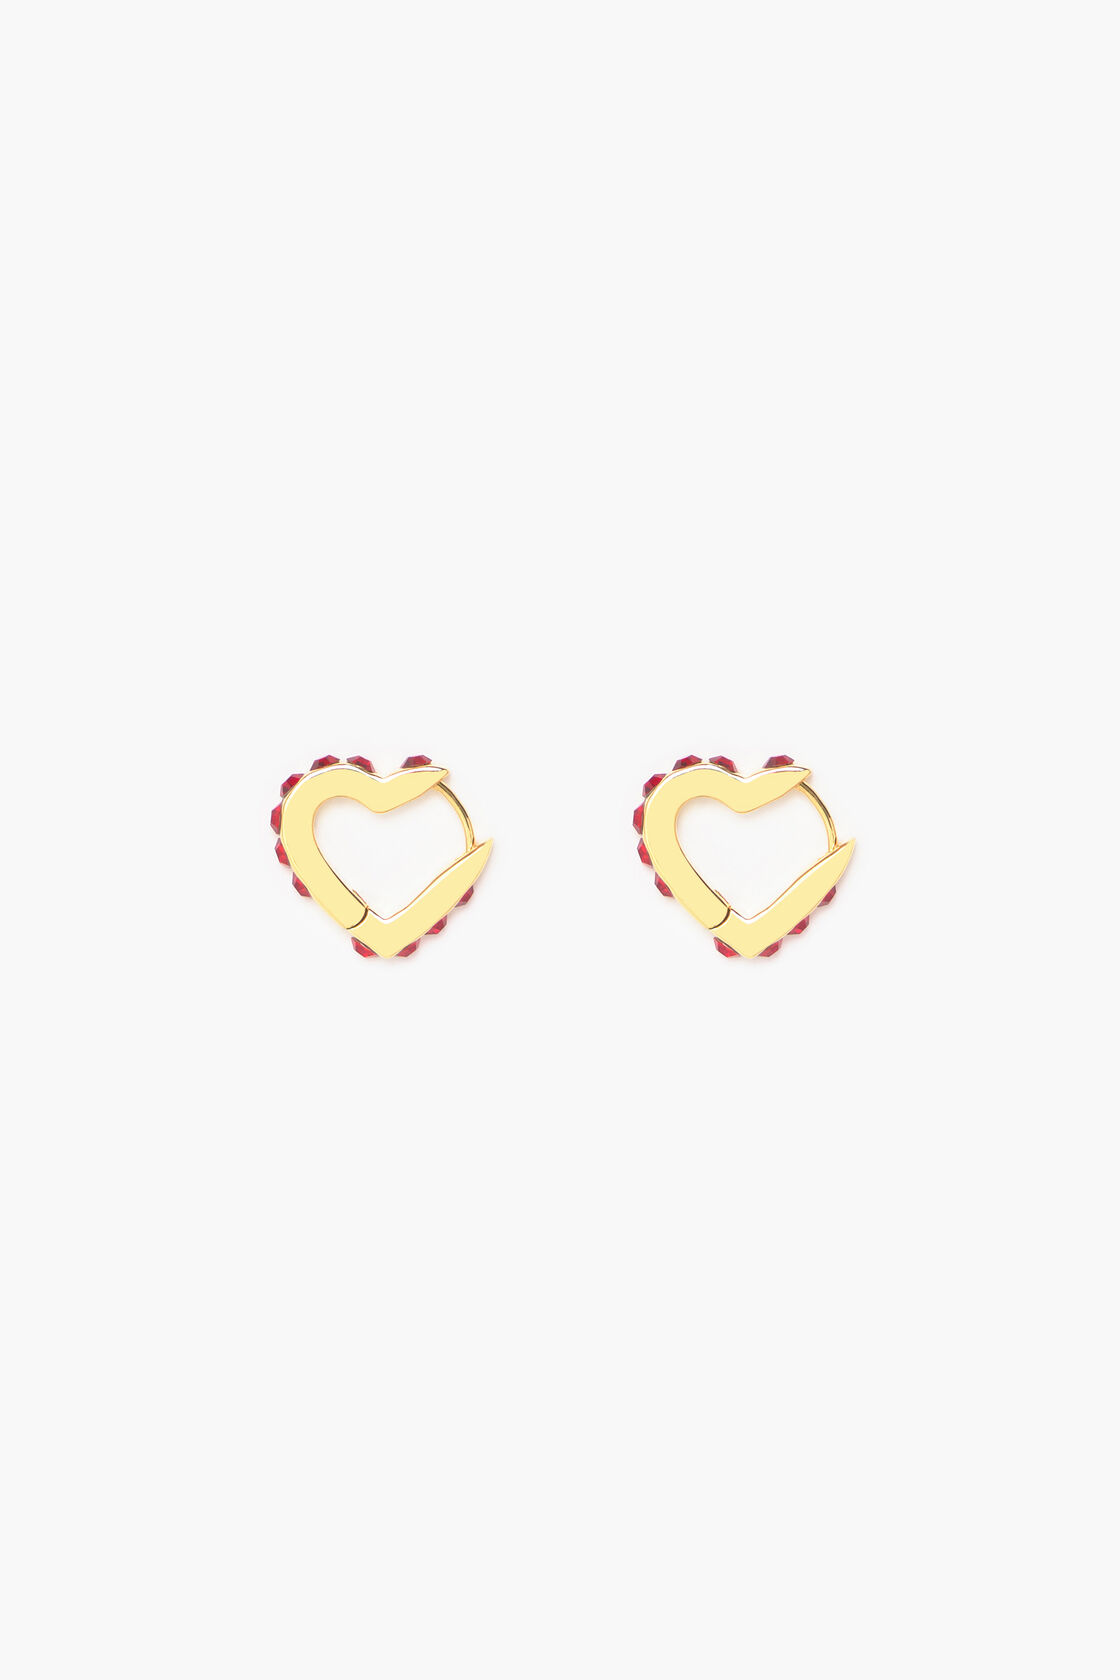 Sparkling Siam Heart Earring Kit – Too Cute Beads